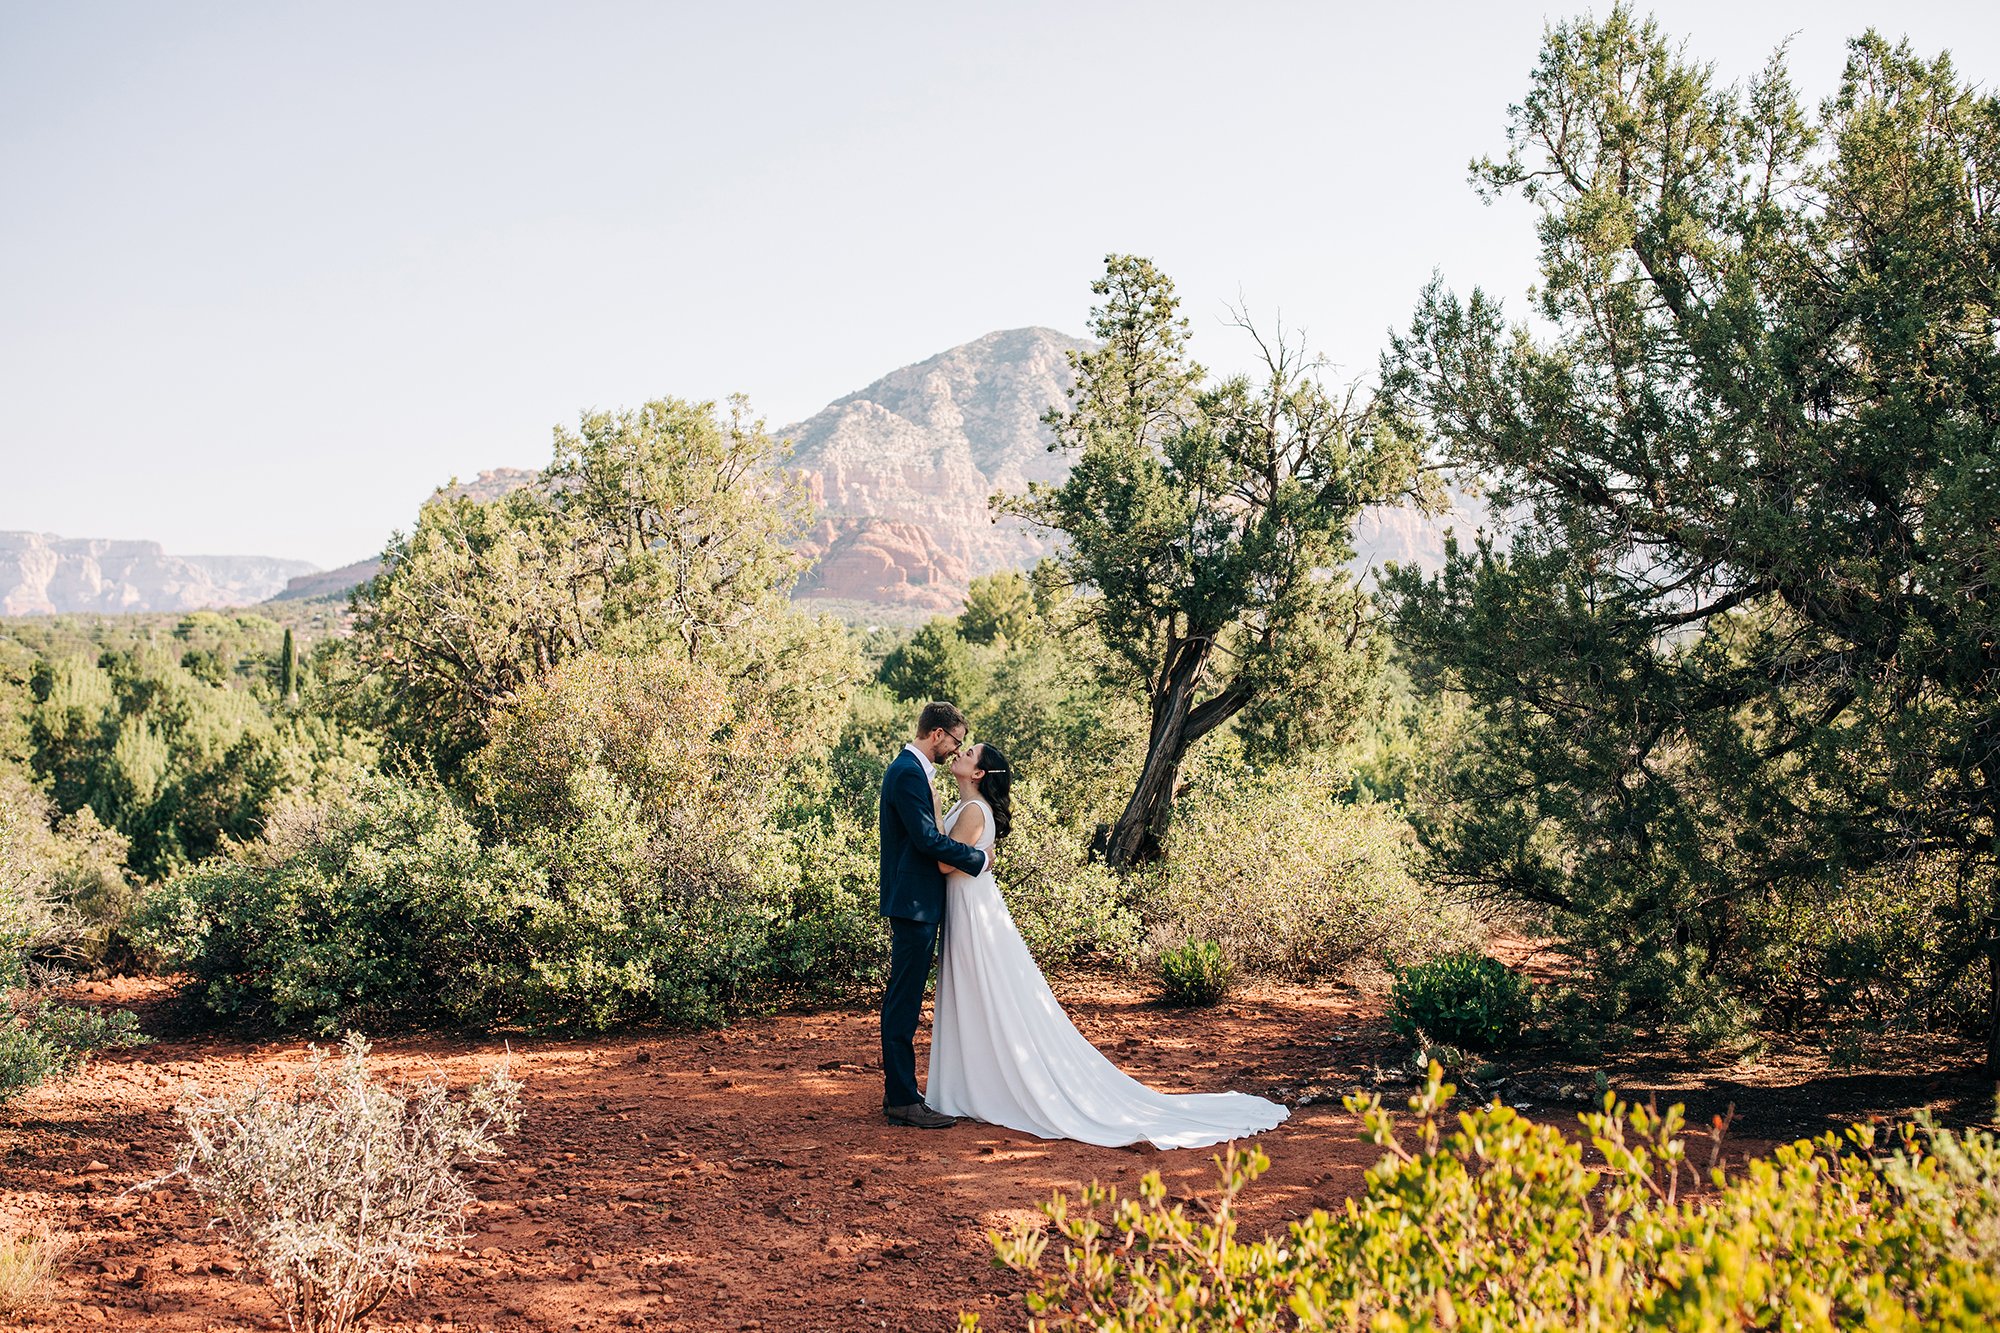 Stephanie and Matthew embrace on their wedding day amongst trees and red rocks. 